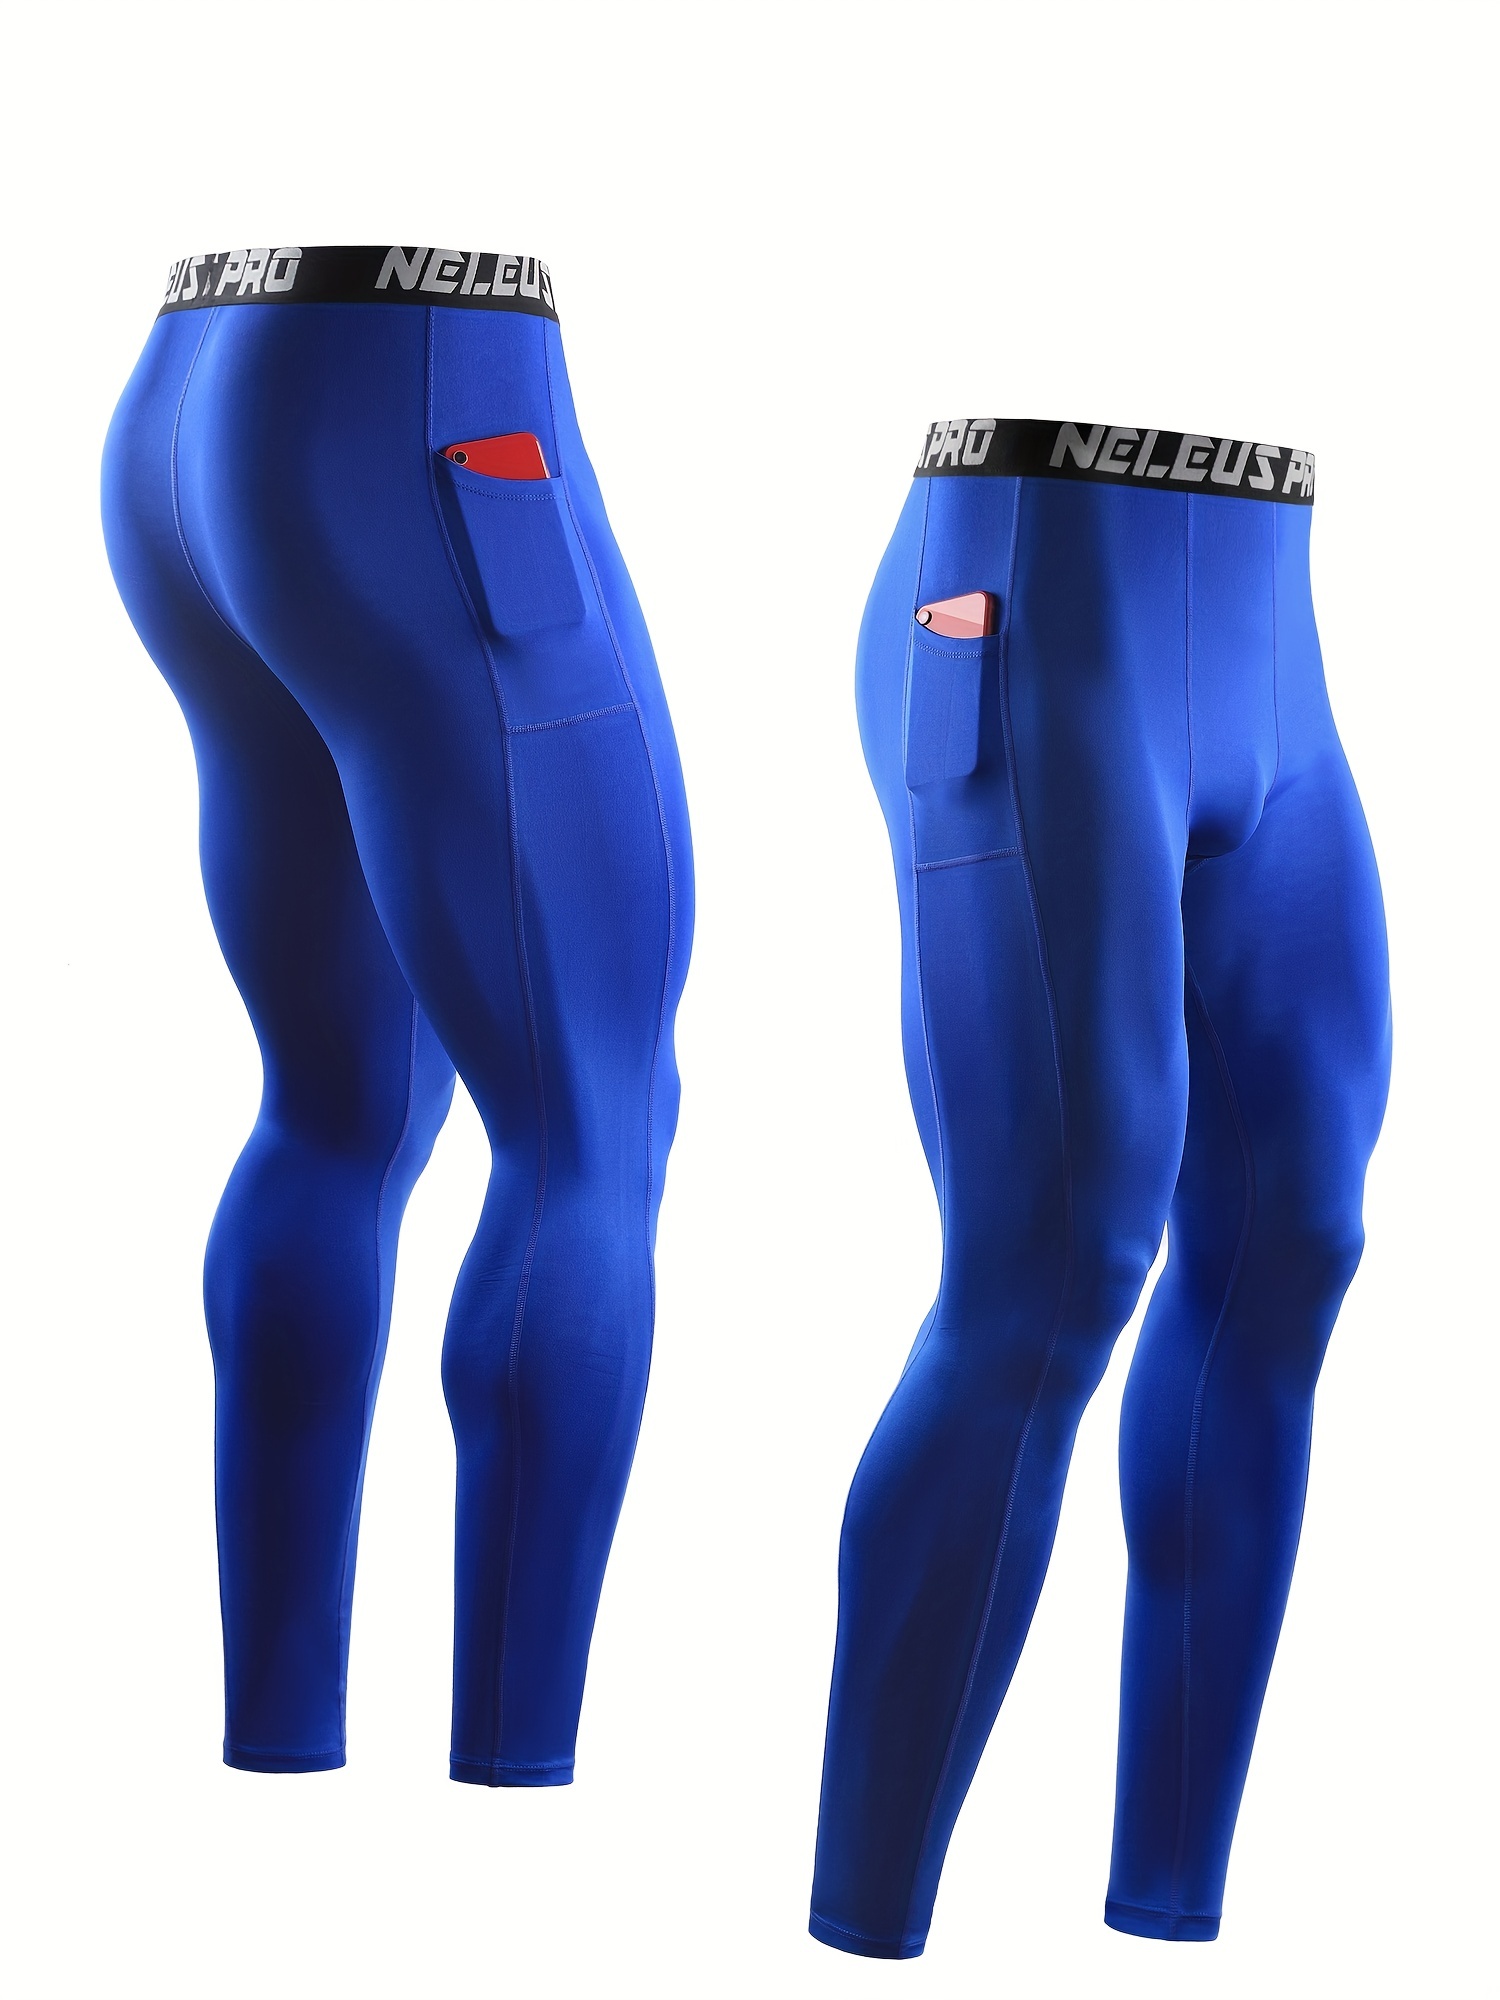 Pants, Shorts and Tights of Compression Woman | Compressport